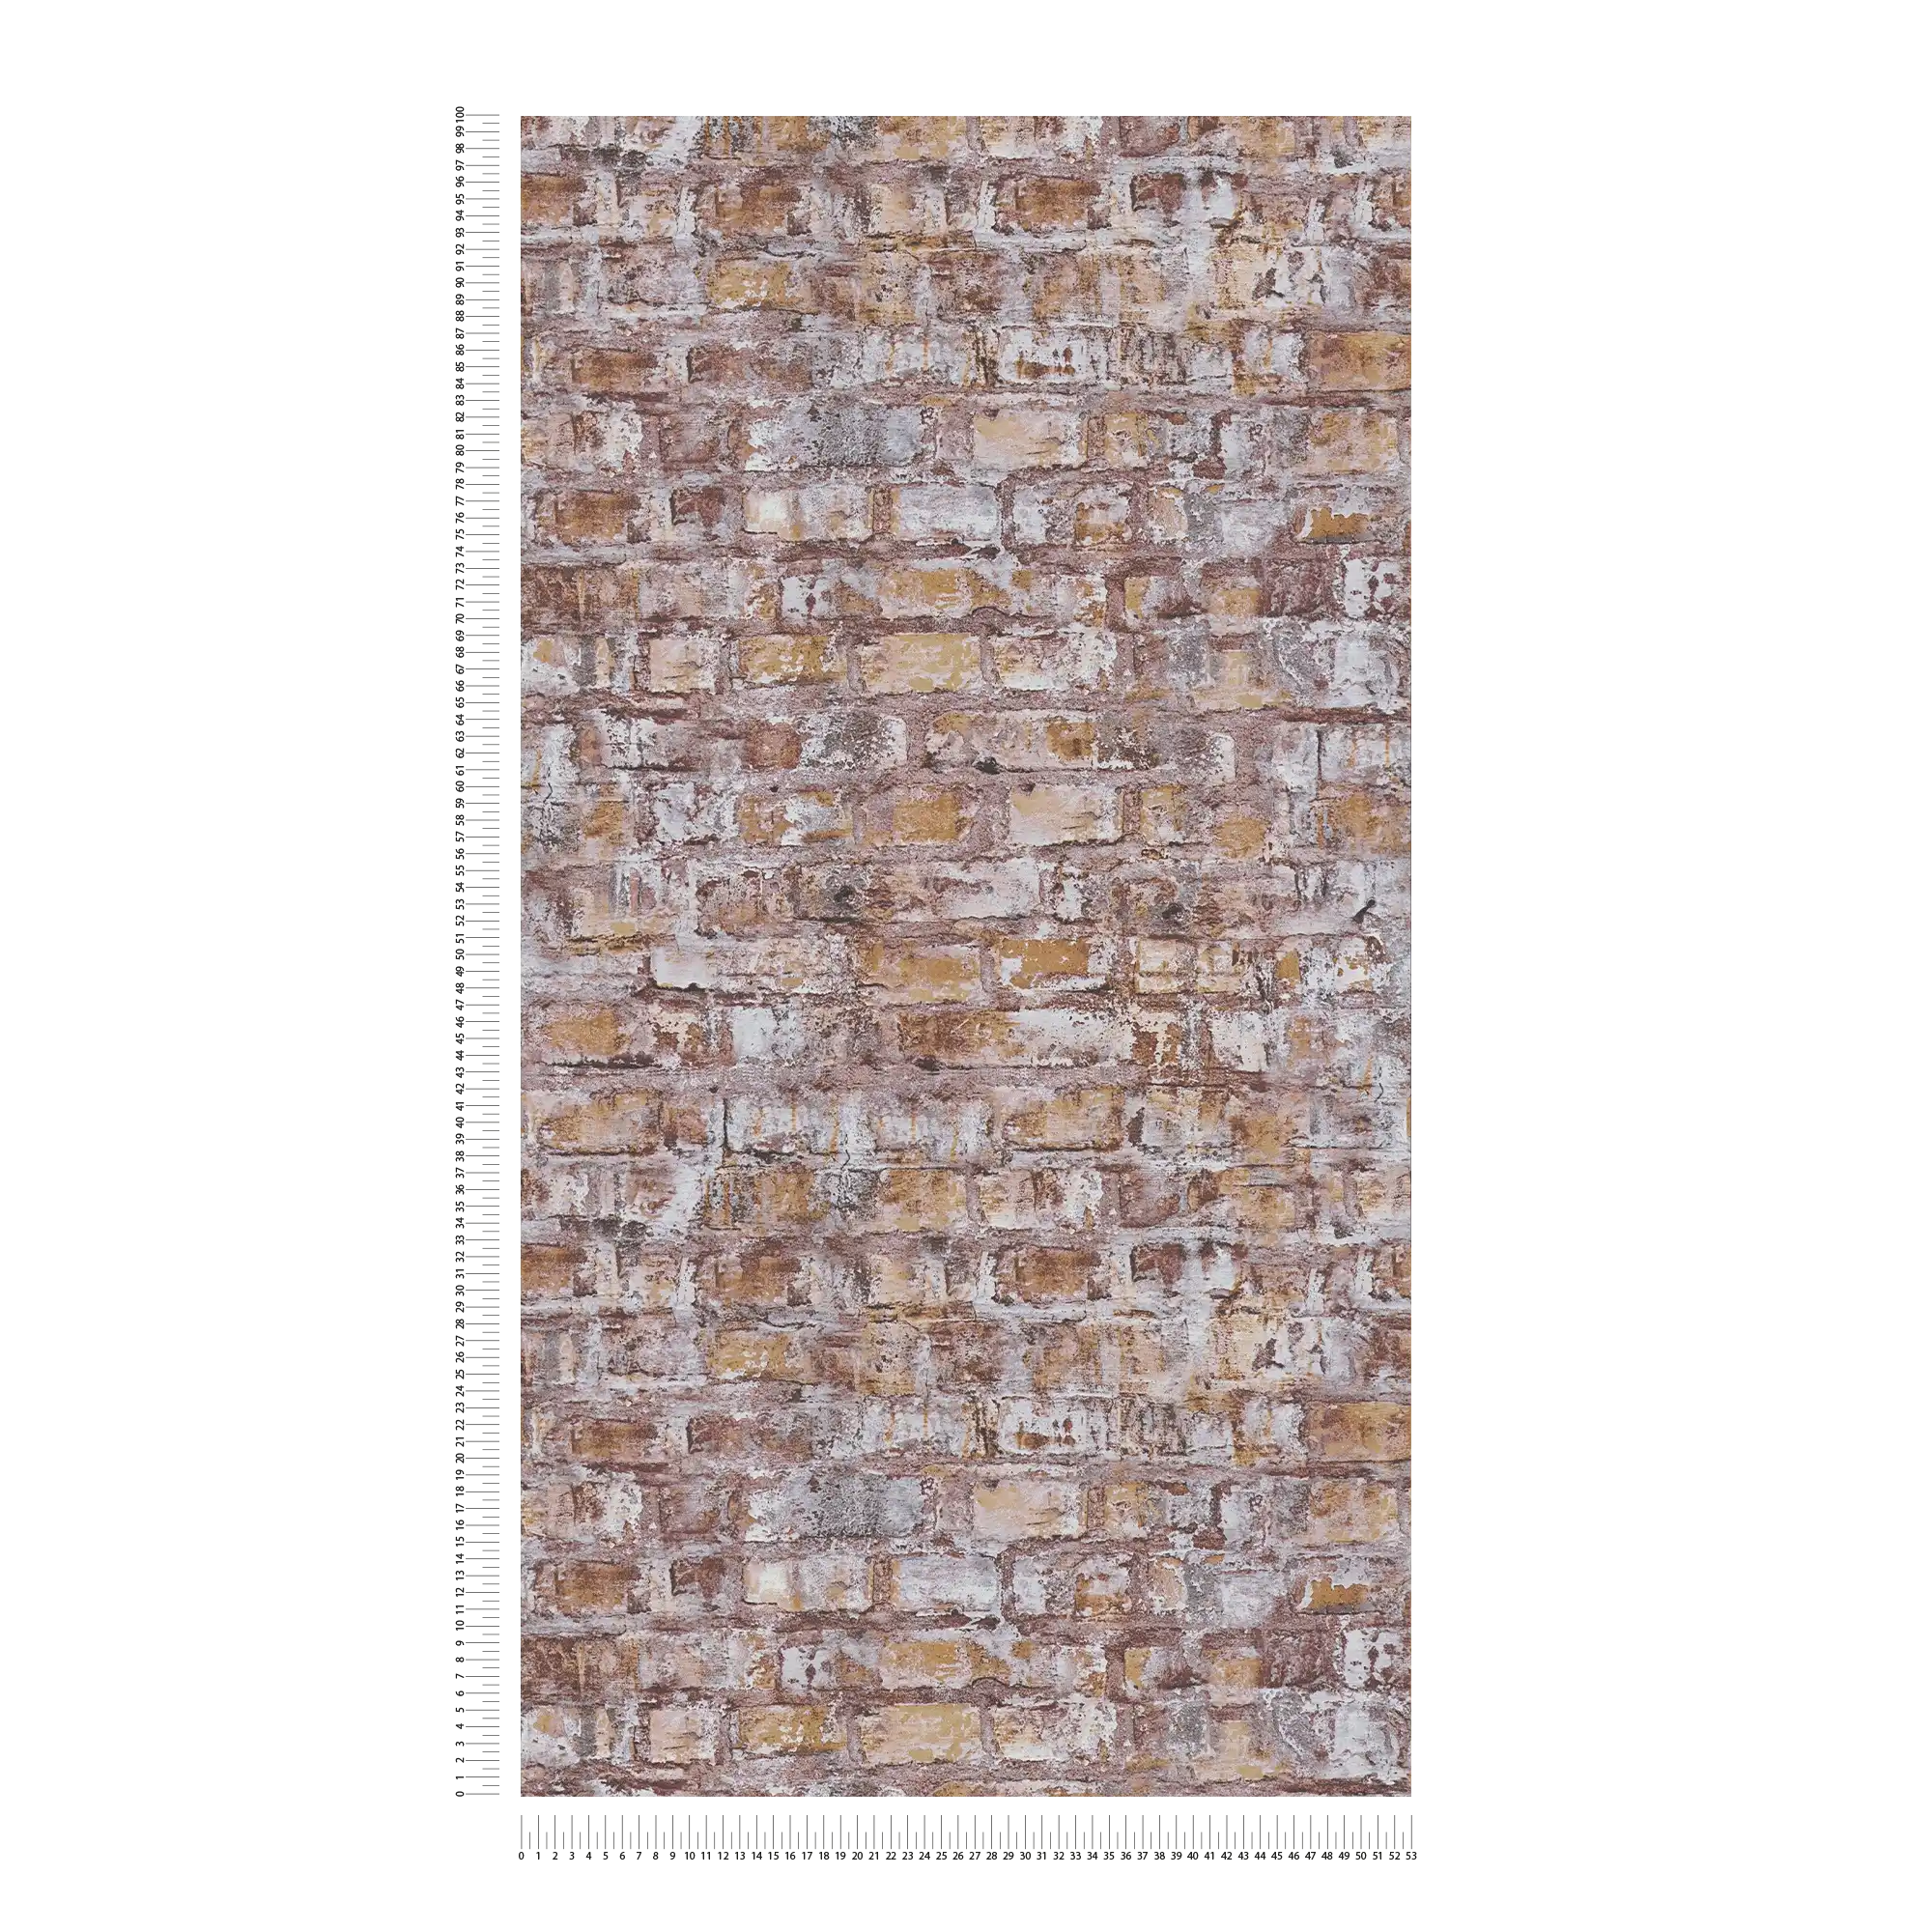             Non-woven wallpaper in brick look with wall design - grey, brown, white, rust
        